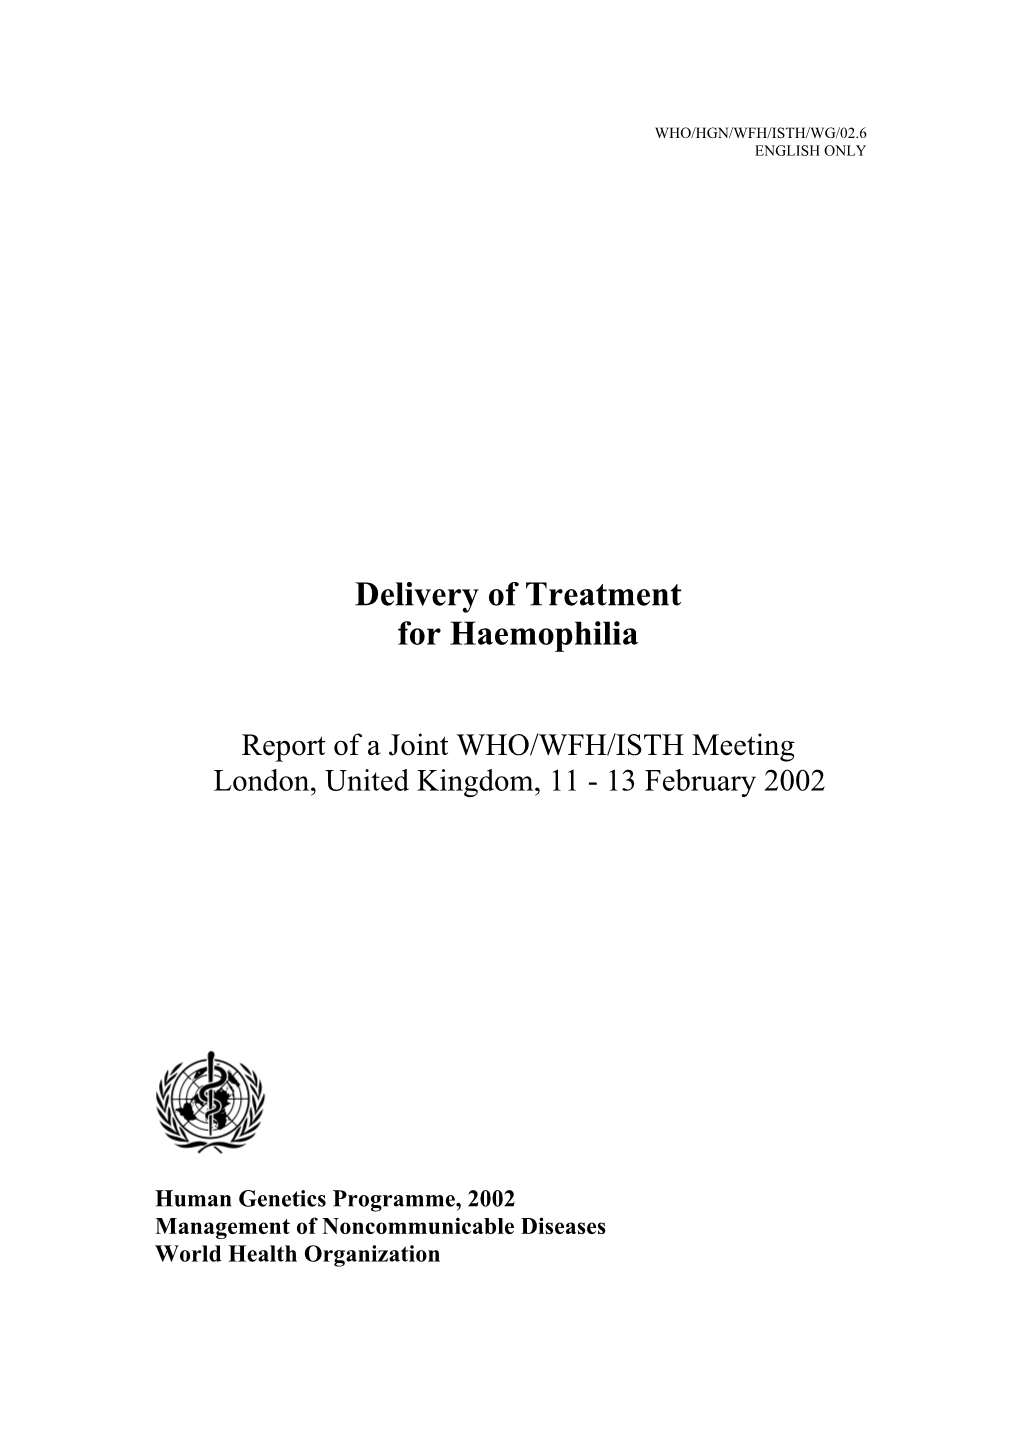 Delivery of Treatment for Haemophilia